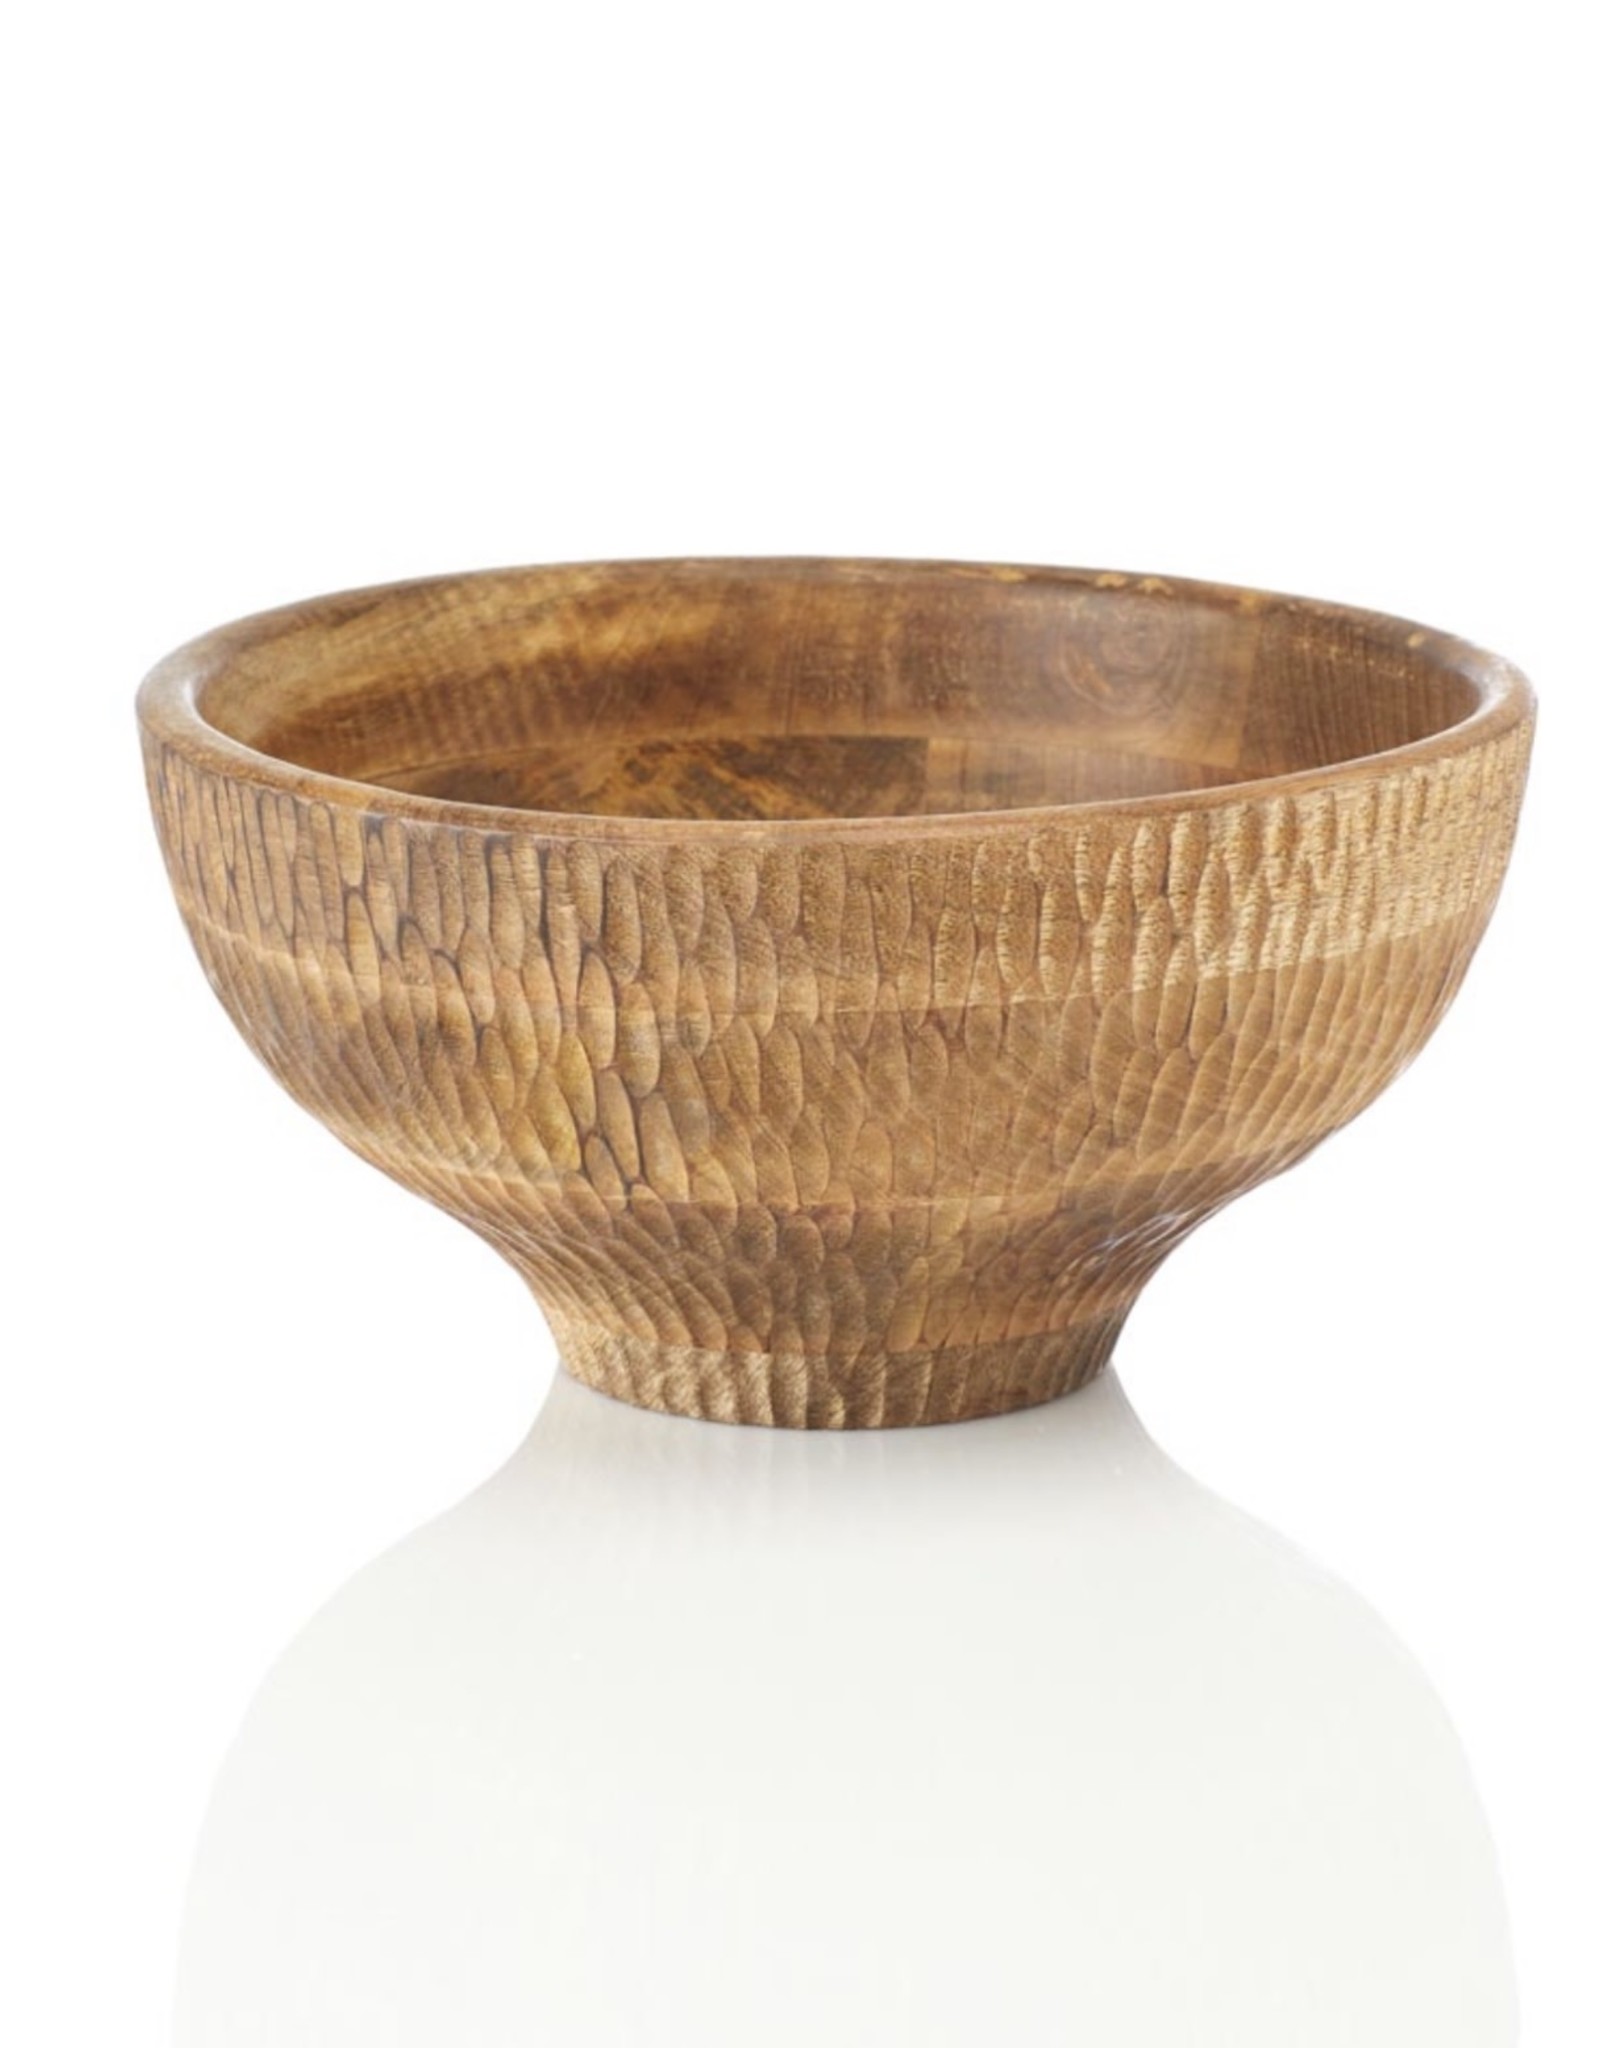 Hand carved Wood Bowl